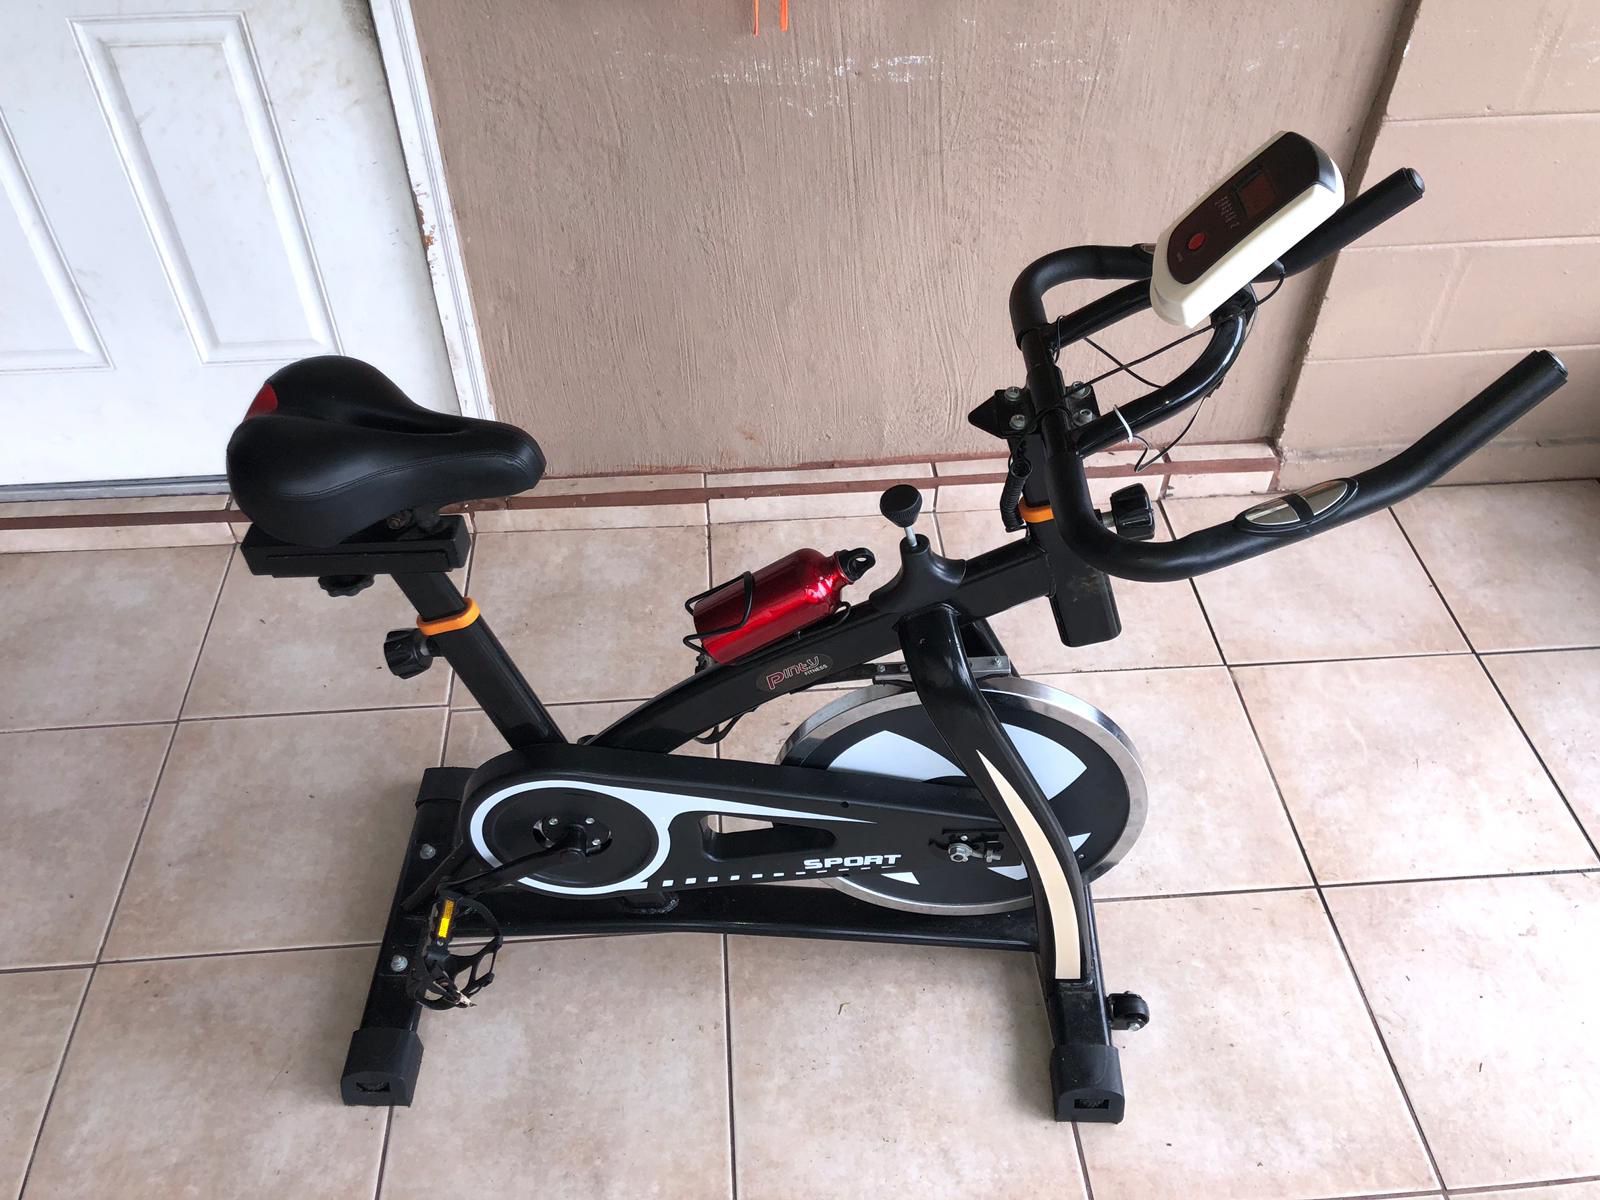 Sport bike for workout exercises